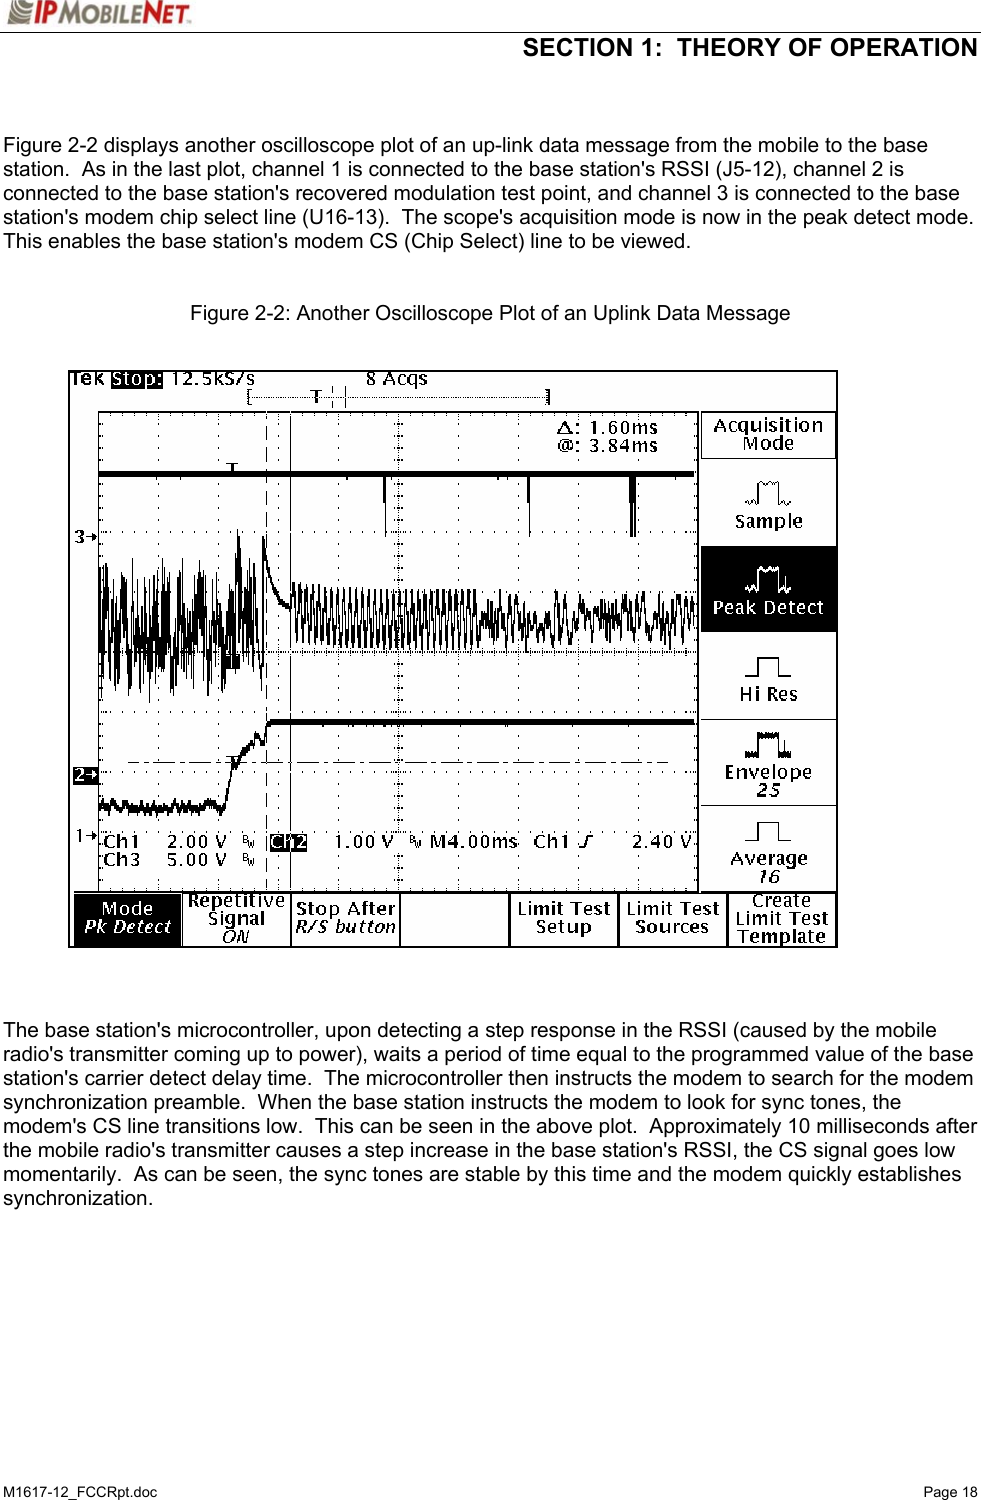  SECTION 1:  THEORY OF OPERATION  M1617-12_FCCRpt.doc   Page 18   Figure 2-2 displays another oscilloscope plot of an up-link data message from the mobile to the base station.  As in the last plot, channel 1 is connected to the base station&apos;s RSSI (J5-12), channel 2 is connected to the base station&apos;s recovered modulation test point, and channel 3 is connected to the base station&apos;s modem chip select line (U16-13).  The scope&apos;s acquisition mode is now in the peak detect mode.  This enables the base station&apos;s modem CS (Chip Select) line to be viewed.   Figure 2-2: Another Oscilloscope Plot of an Uplink Data Message     The base station&apos;s microcontroller, upon detecting a step response in the RSSI (caused by the mobile radio&apos;s transmitter coming up to power), waits a period of time equal to the programmed value of the base station&apos;s carrier detect delay time.  The microcontroller then instructs the modem to search for the modem synchronization preamble.  When the base station instructs the modem to look for sync tones, the modem&apos;s CS line transitions low.  This can be seen in the above plot.  Approximately 10 milliseconds after the mobile radio&apos;s transmitter causes a step increase in the base station&apos;s RSSI, the CS signal goes low momentarily.  As can be seen, the sync tones are stable by this time and the modem quickly establishes synchronization.   